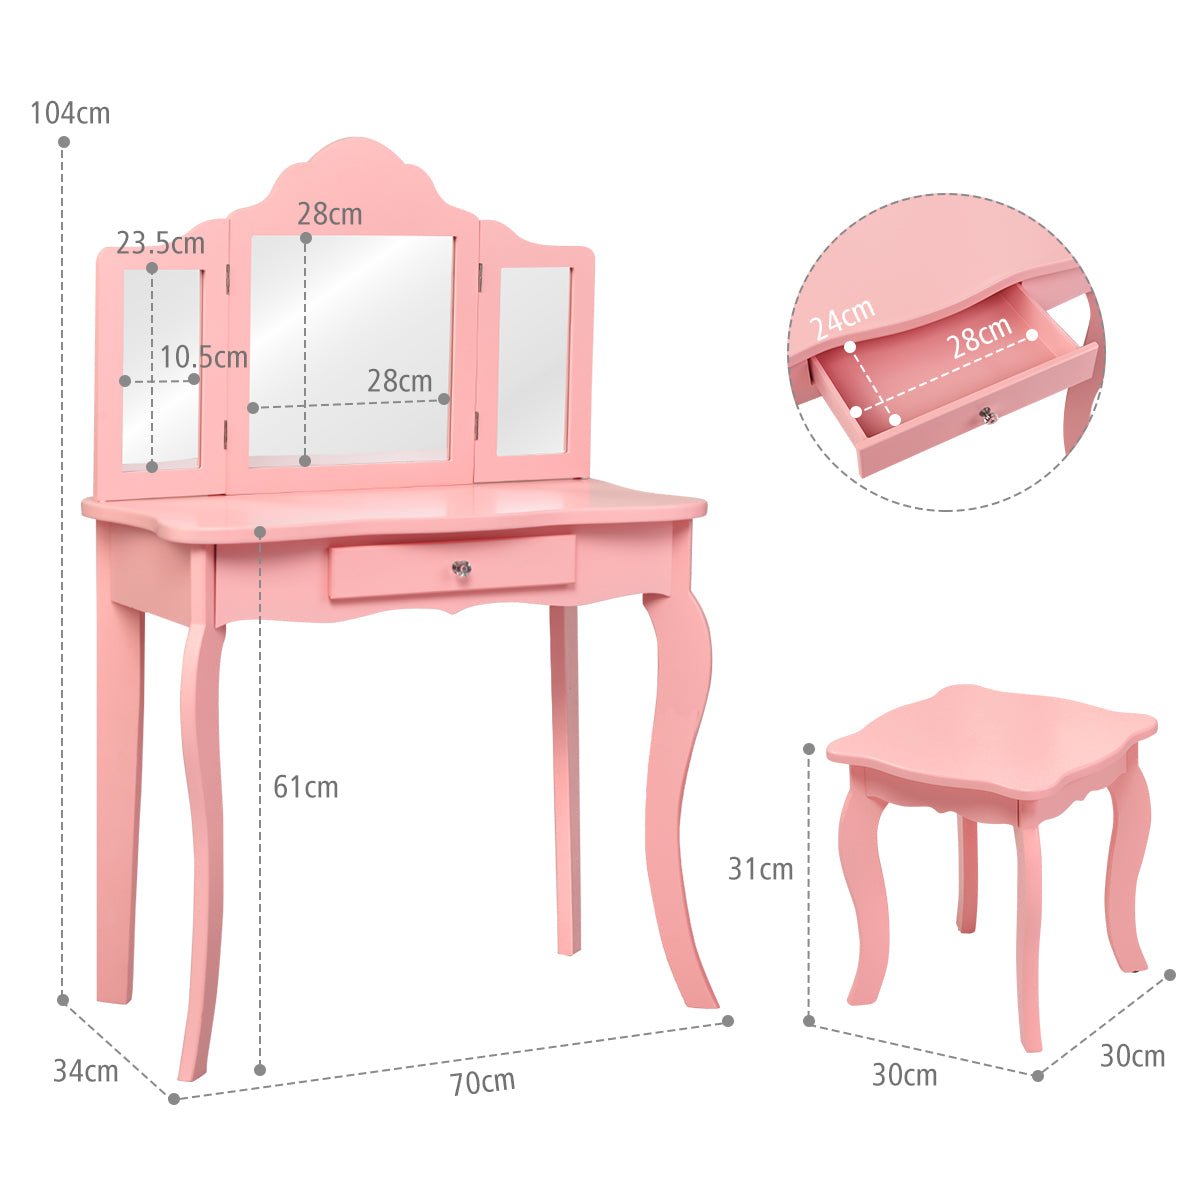 Children's Dressing Table with Stool & Mirror - A World of Fun